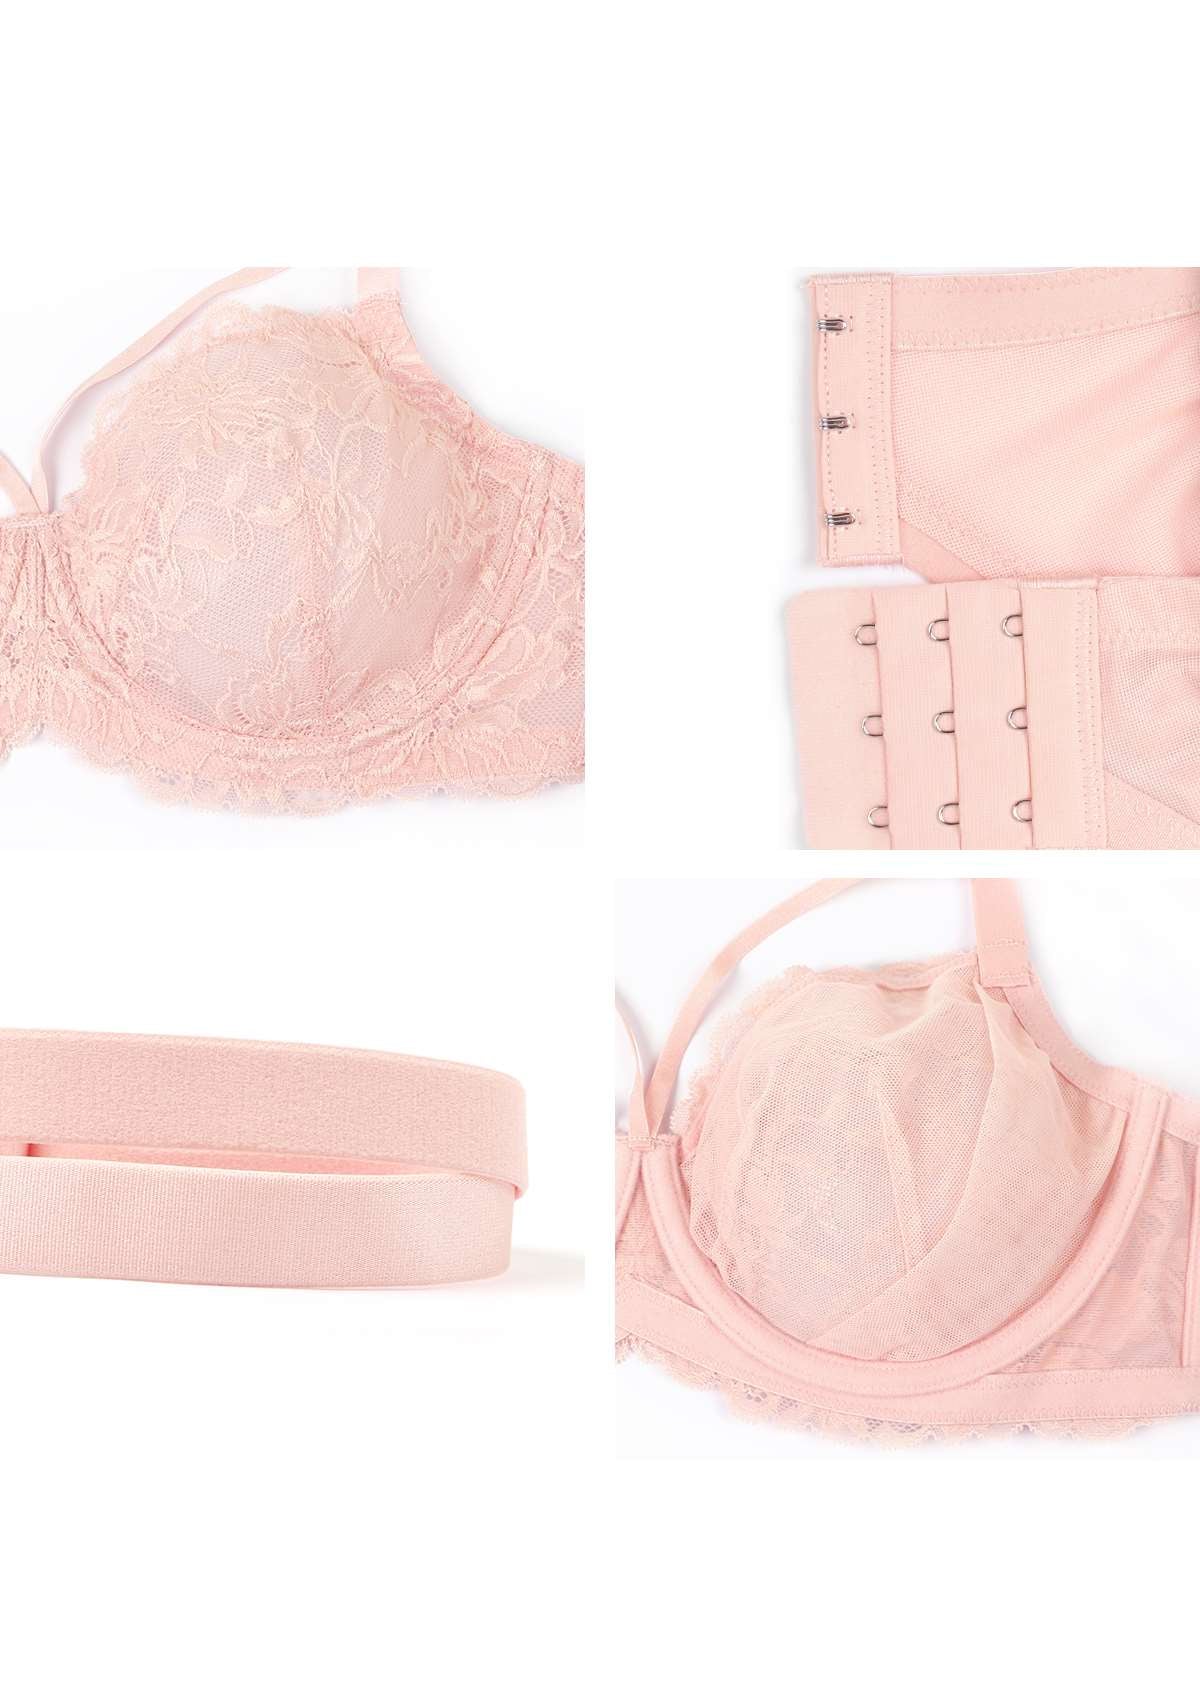 HSIA Pretty In Petals: Strappy Lace Sheer Bra For Side And Back Fat - Baby Pink / 44 / G